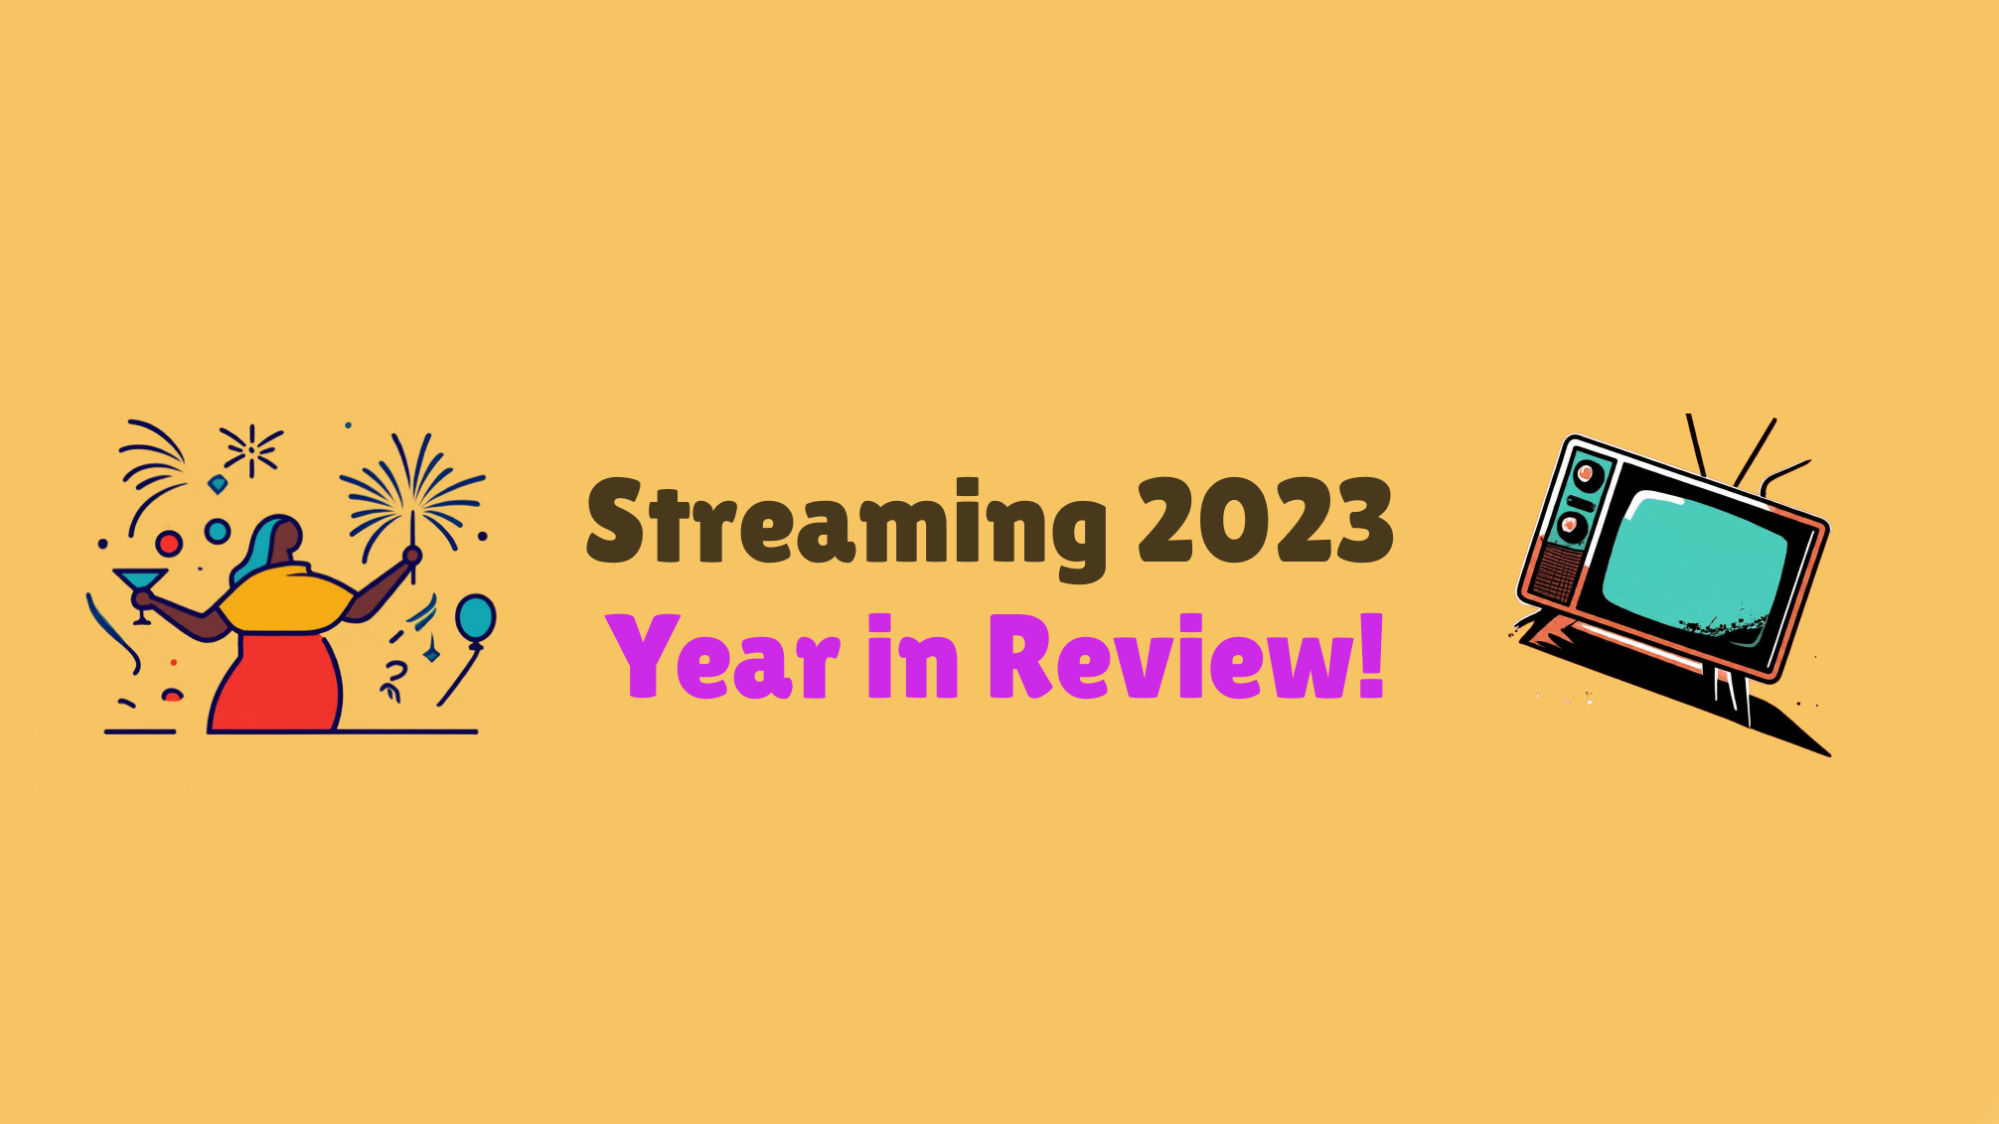 streaming 2023 year in review. Illustration of a woman celebrating with fireworks and balloons. Illustration of a TV